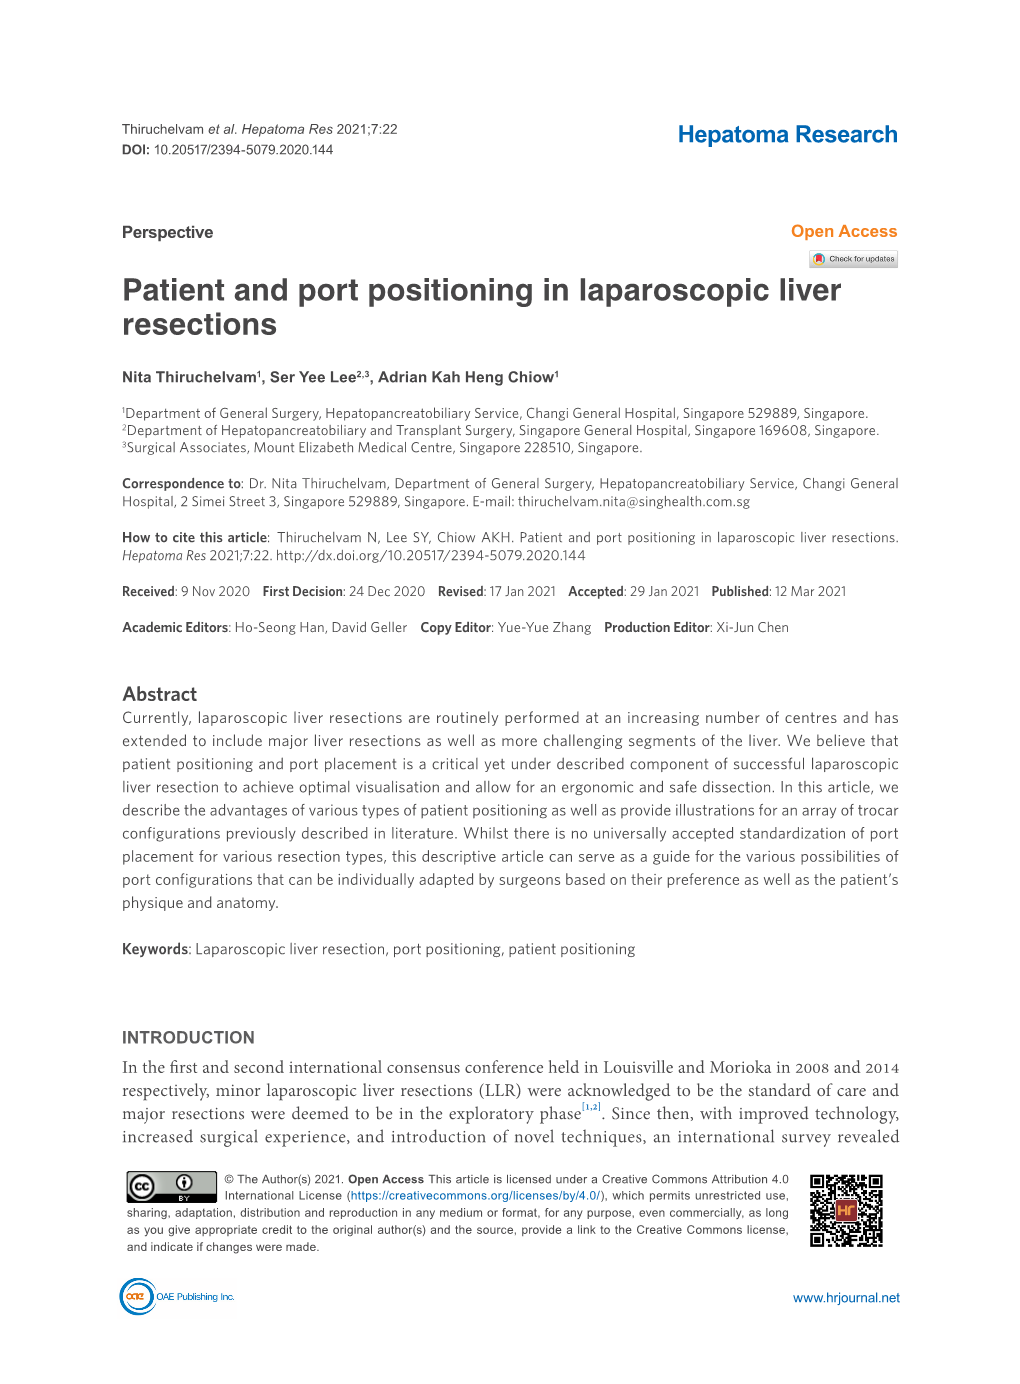 Patient and Port Positioning in Laparoscopic Liver Resections